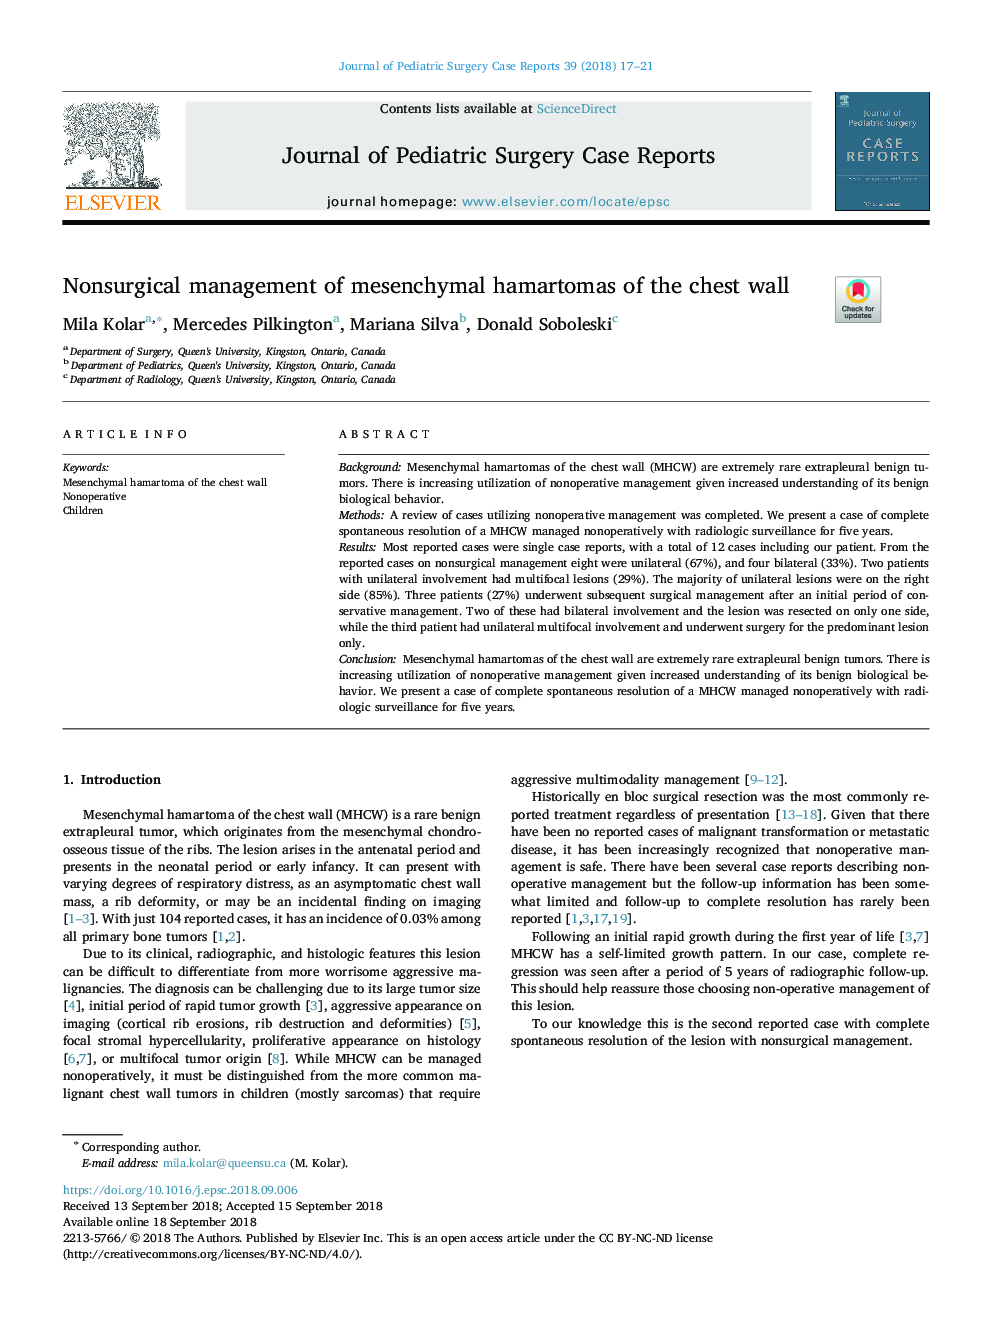 Nonsurgical management of mesenchymal hamartomas of the chest wall